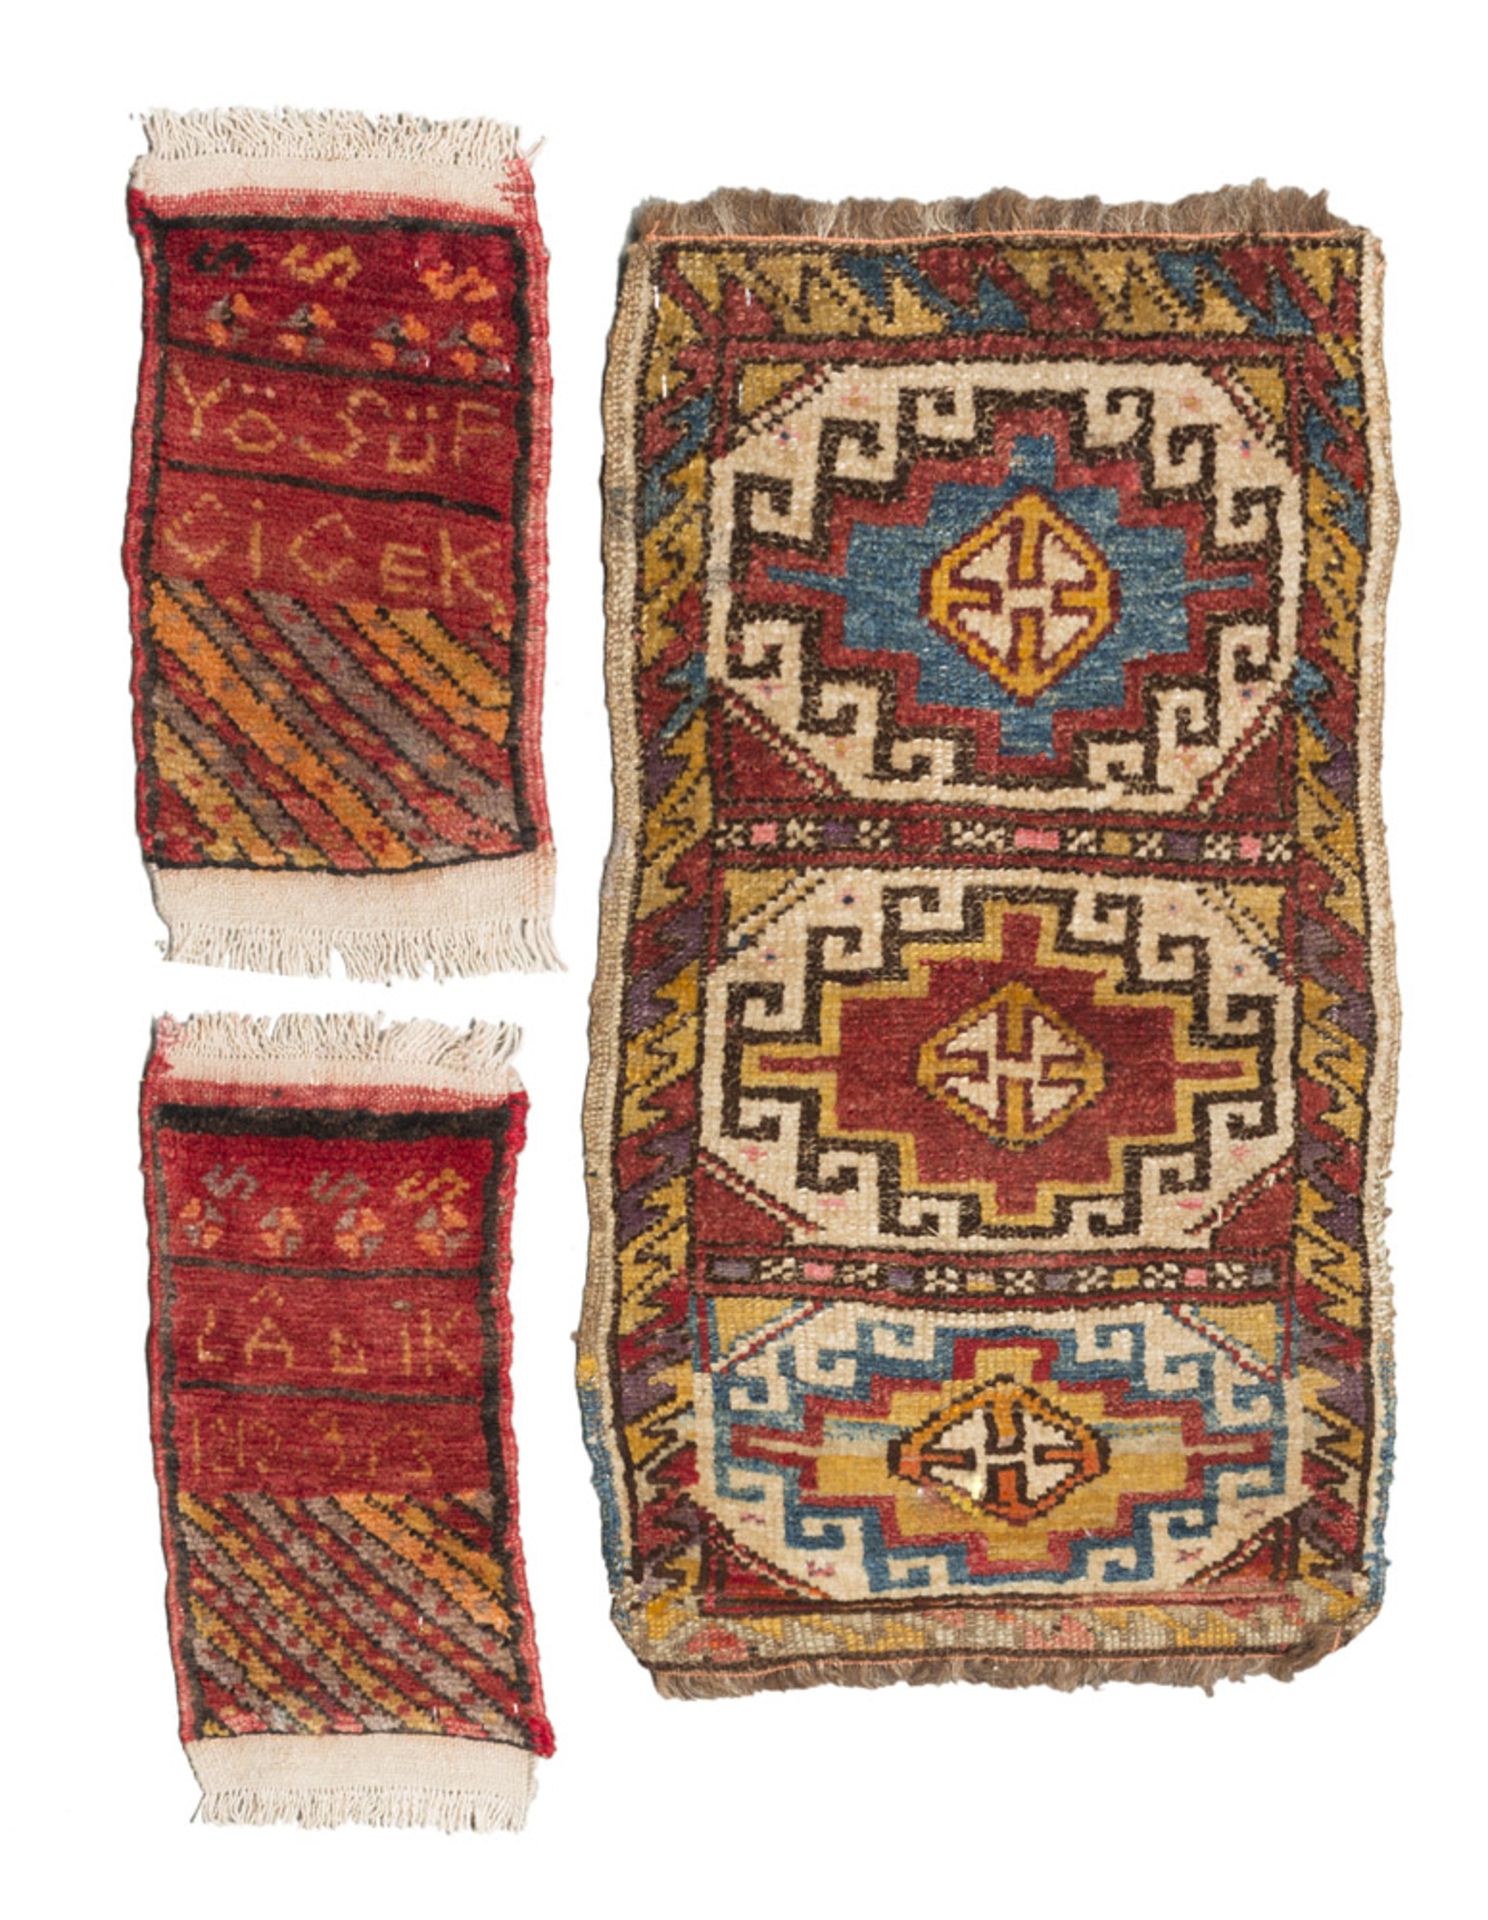 TWO KONIA CARPETS – EARLY 20TH CENTURY